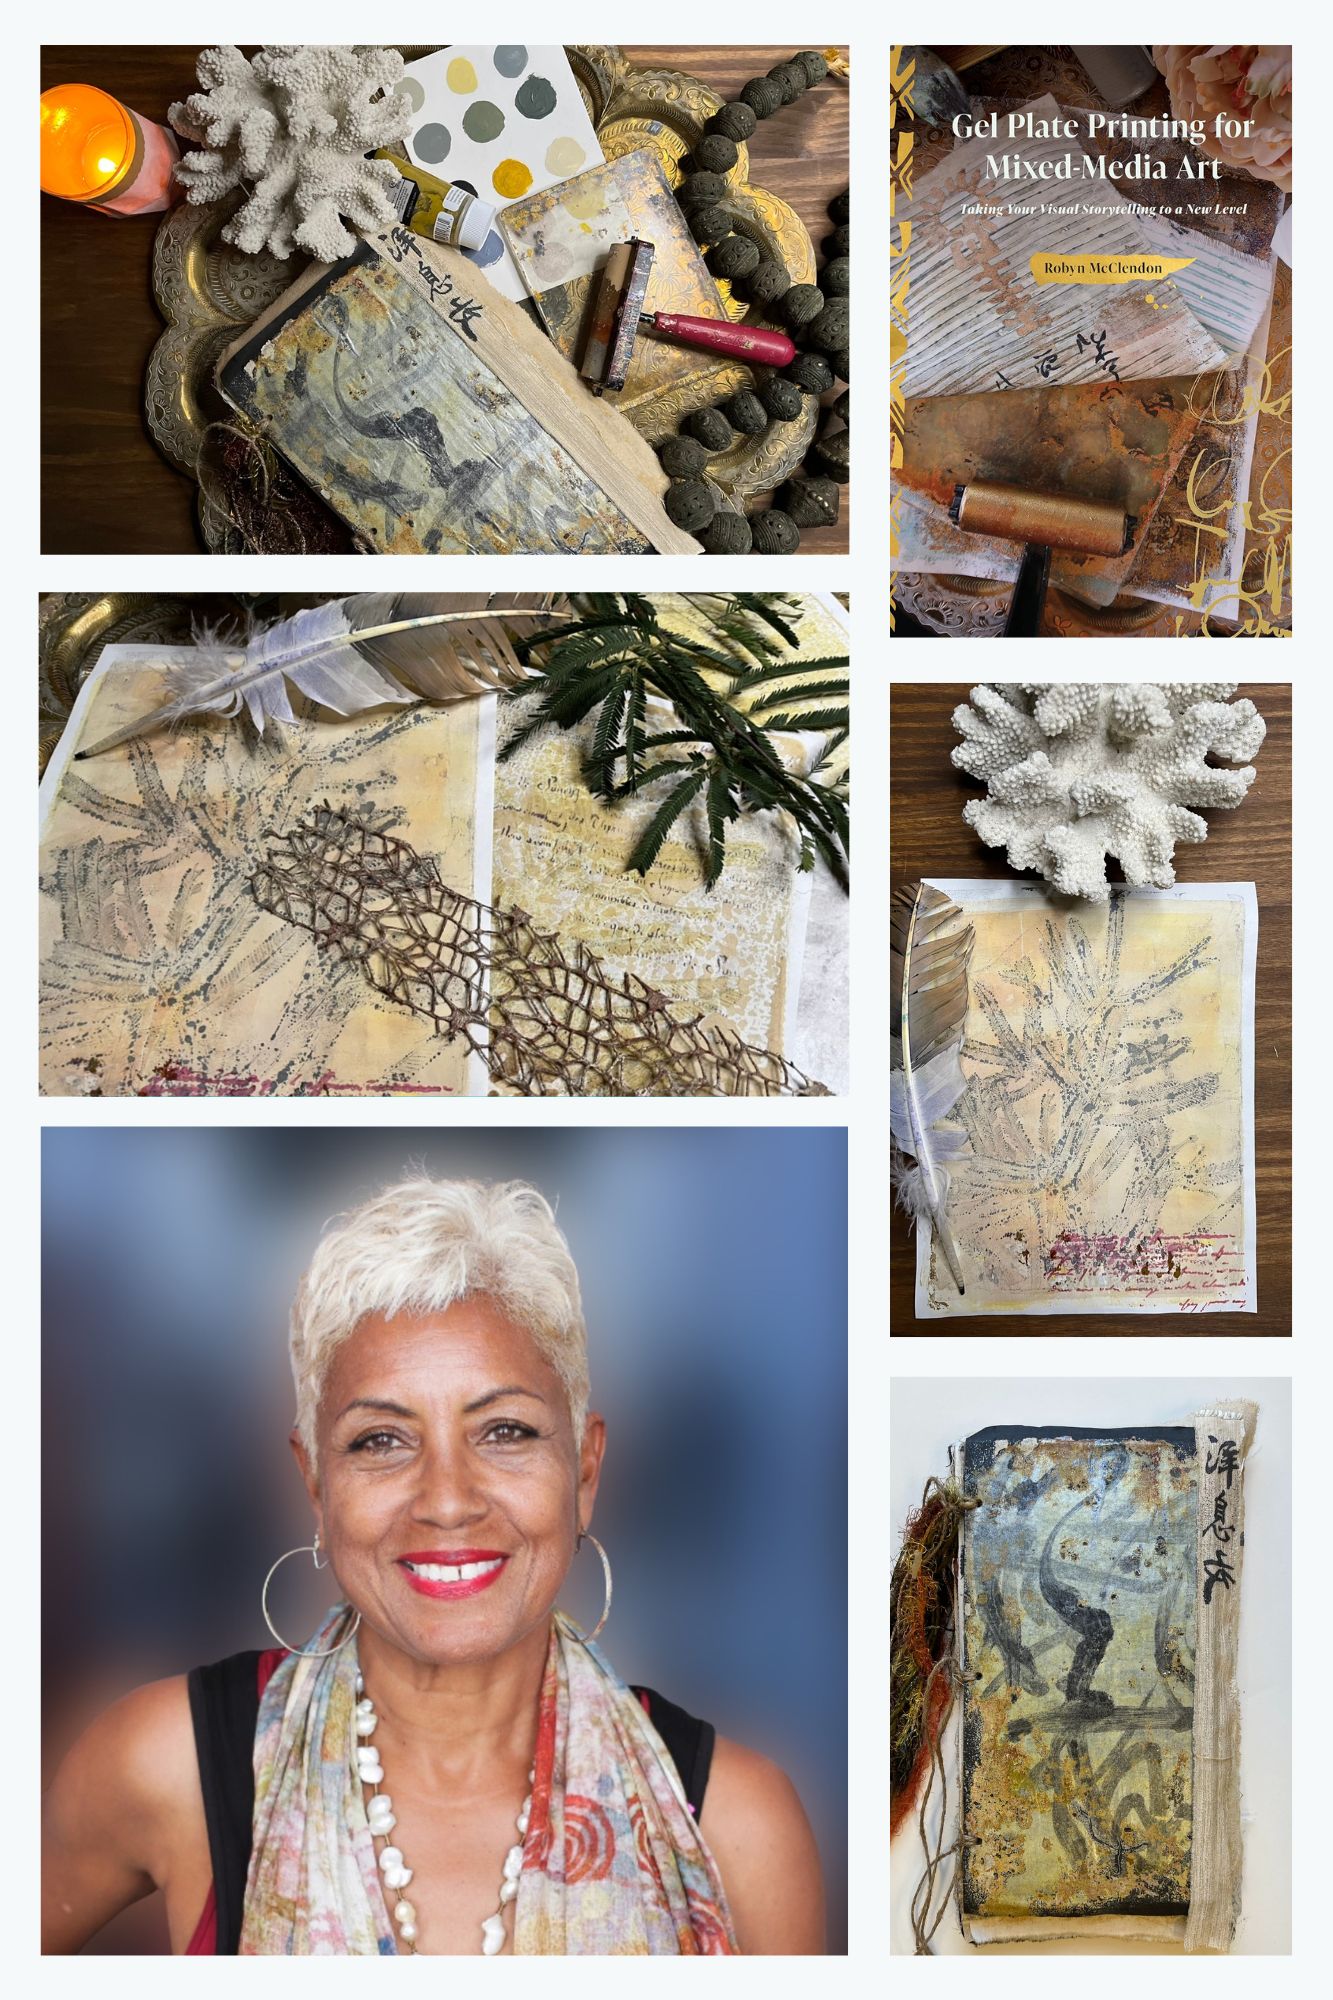 photo collage of Robyn McClendon and gelli printing